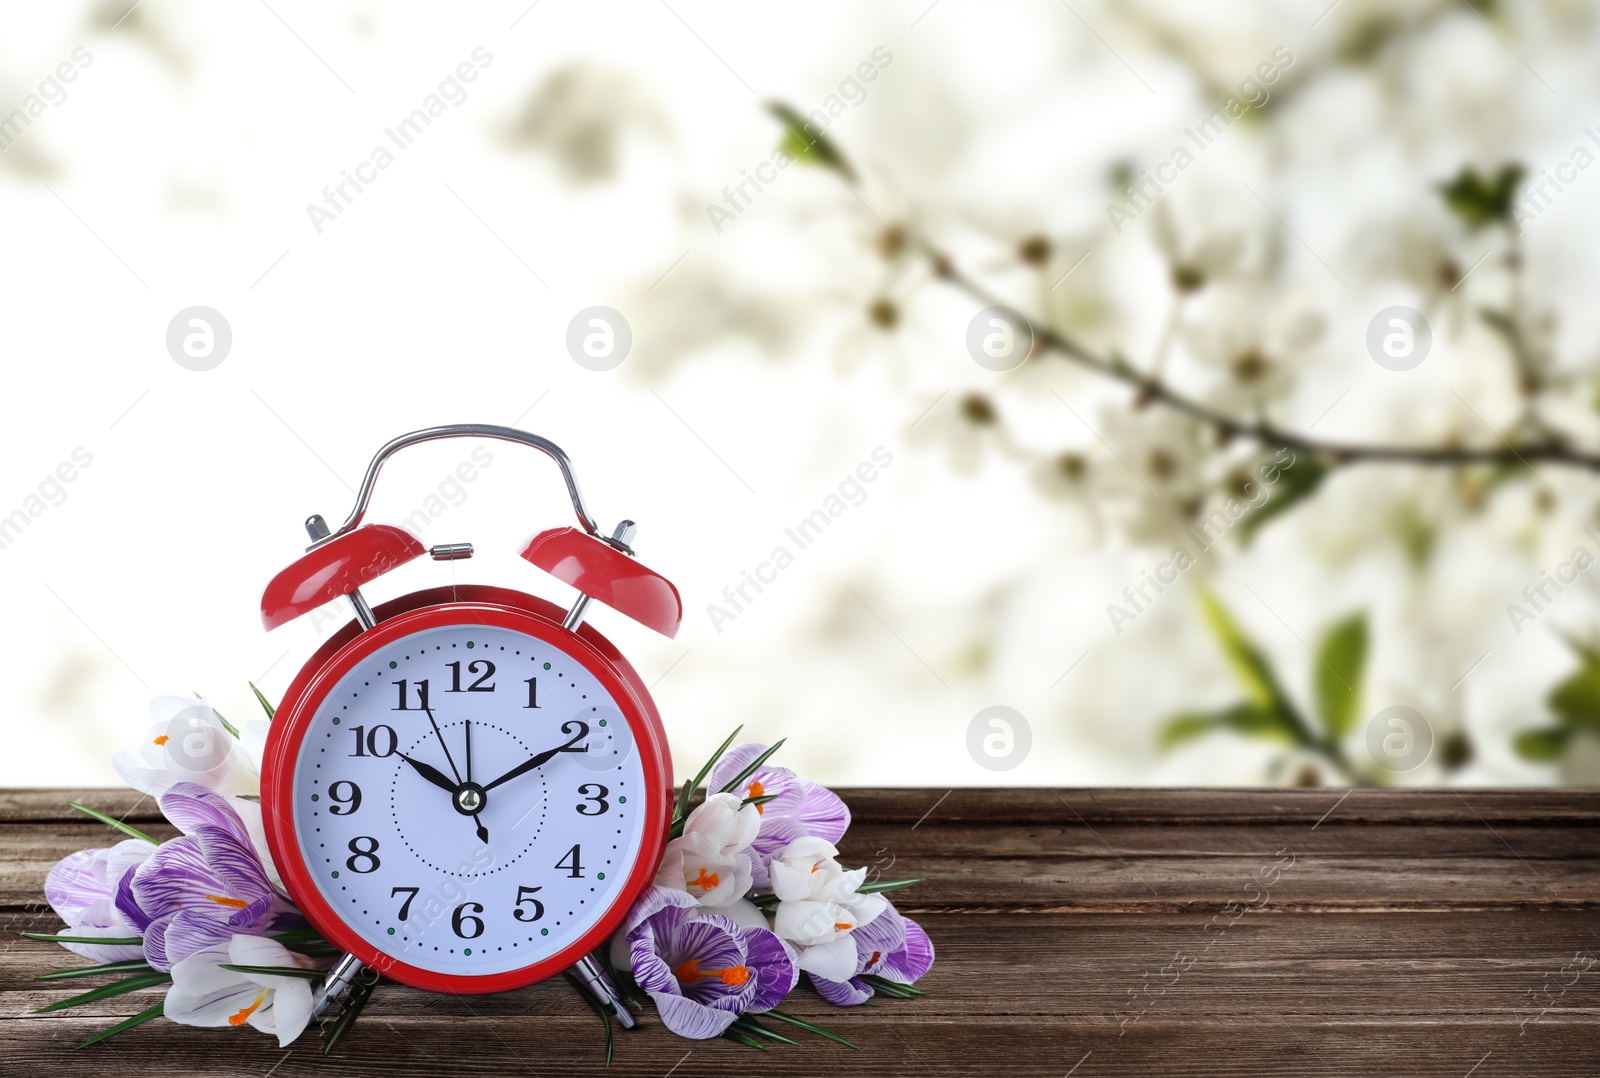 Image of Alarm clock and spring flowers on wooden table, space for text. Time change 